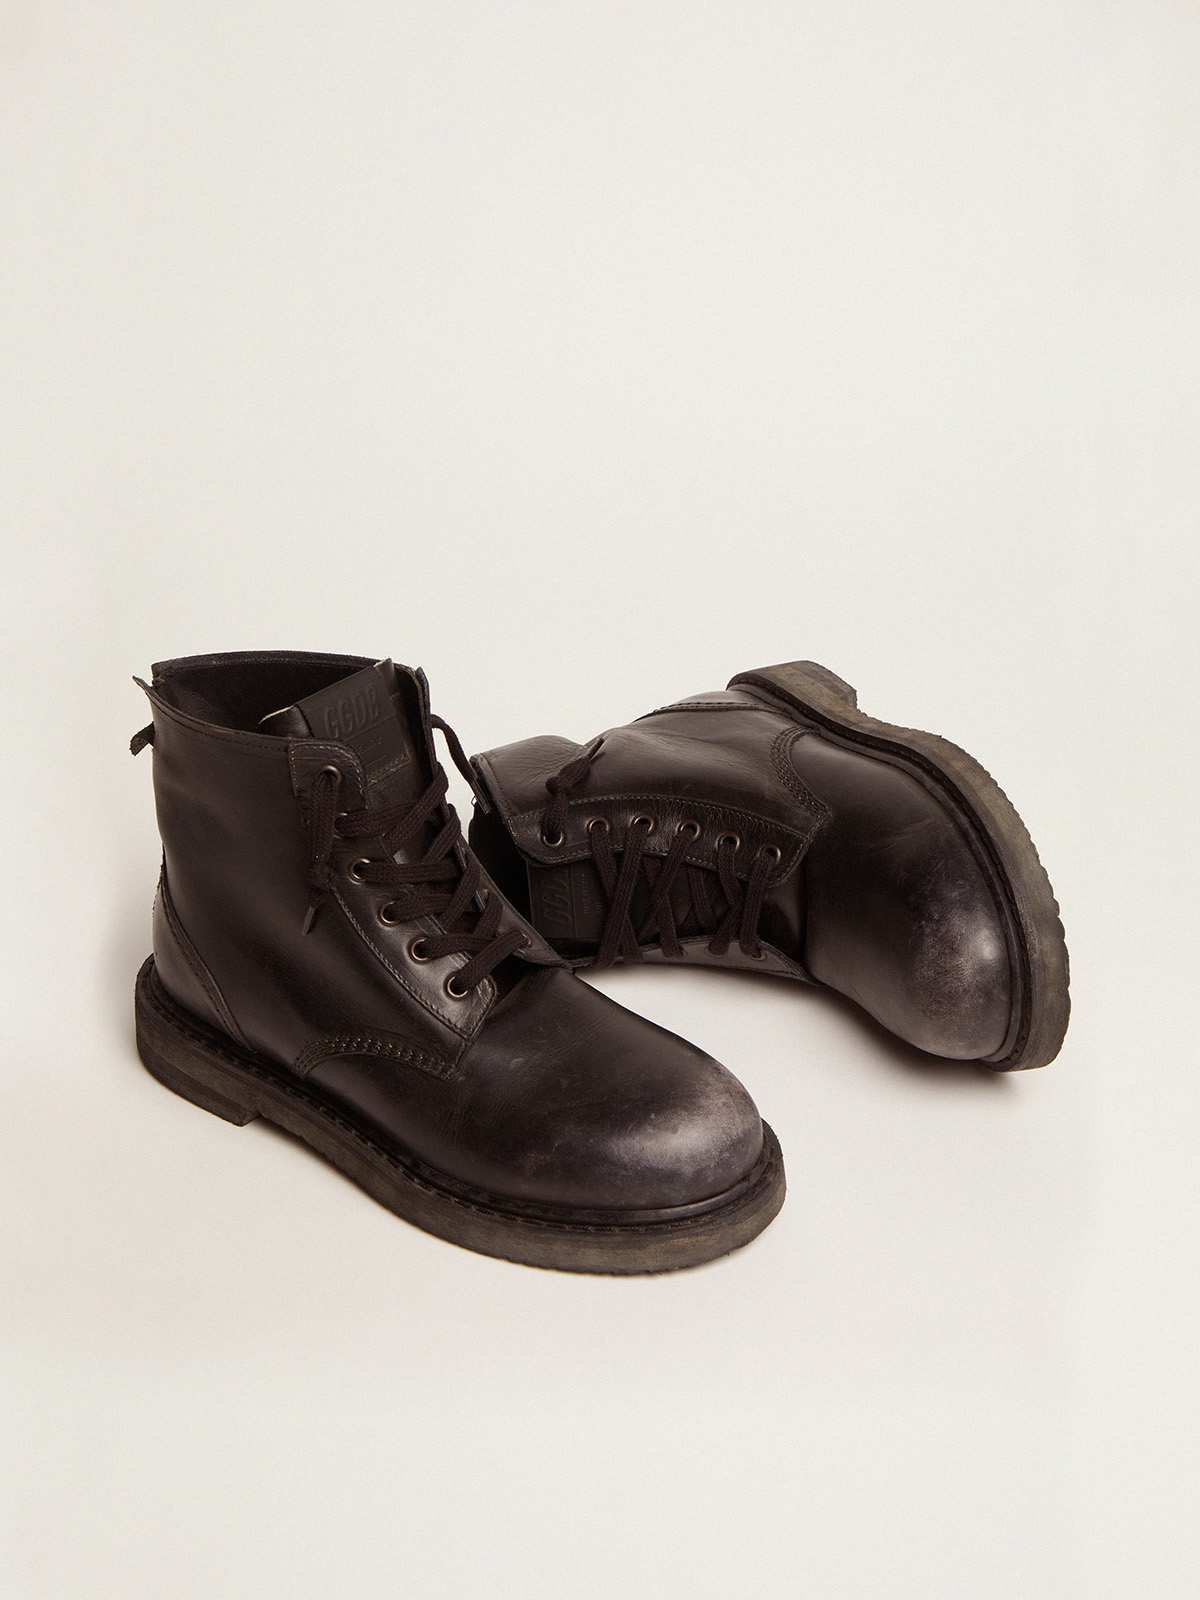 ryste sum stole Women's boots in black leather | Golden Goose